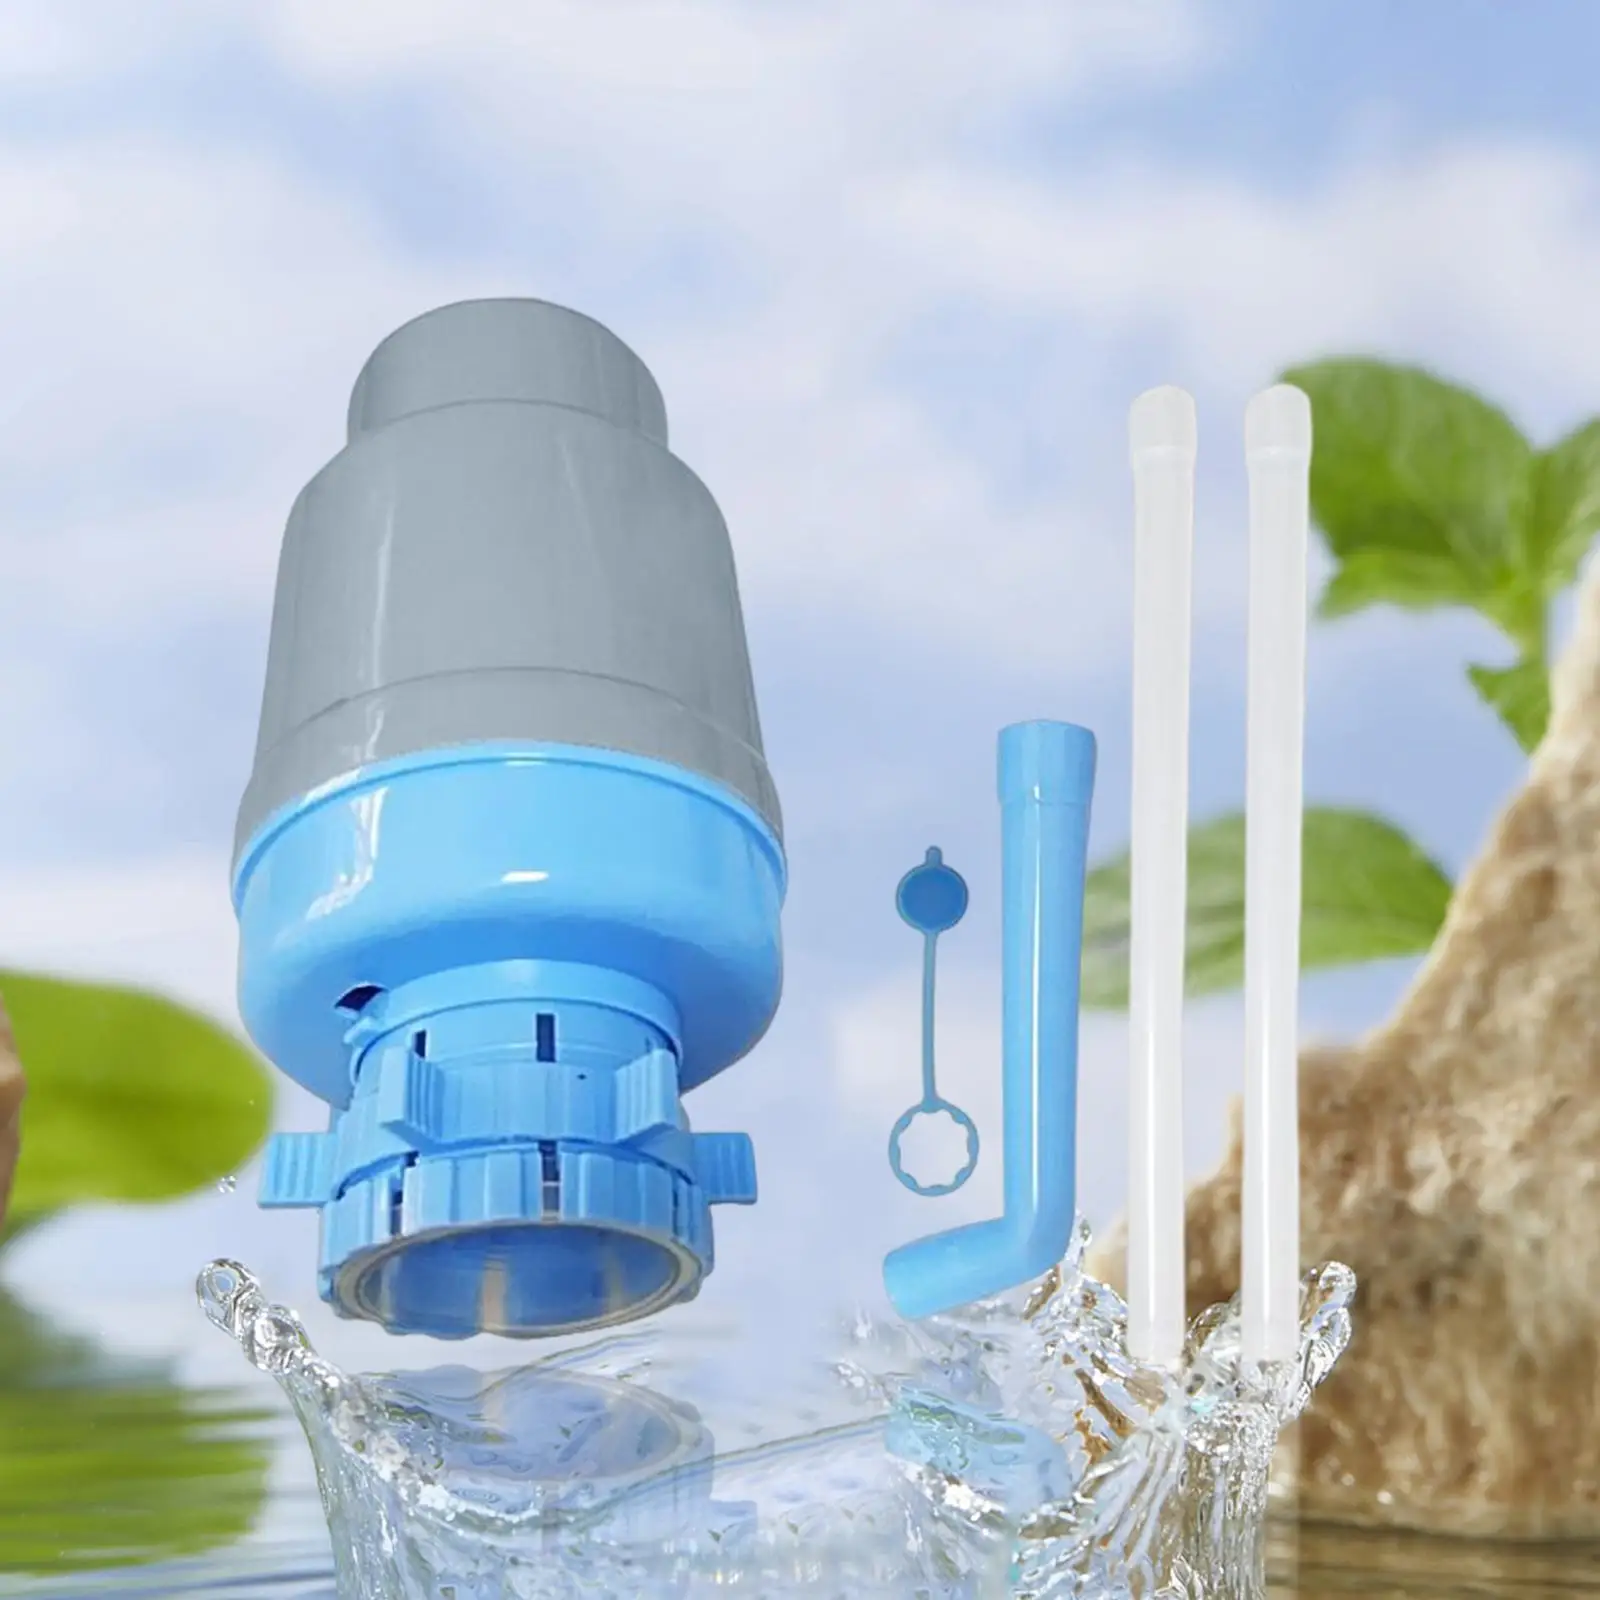 Manual Drinking Water Pump with Hose Vacuum Action Hand Press Portable Water Bottle Pump for Hiking Picnic Home Outdoor Office